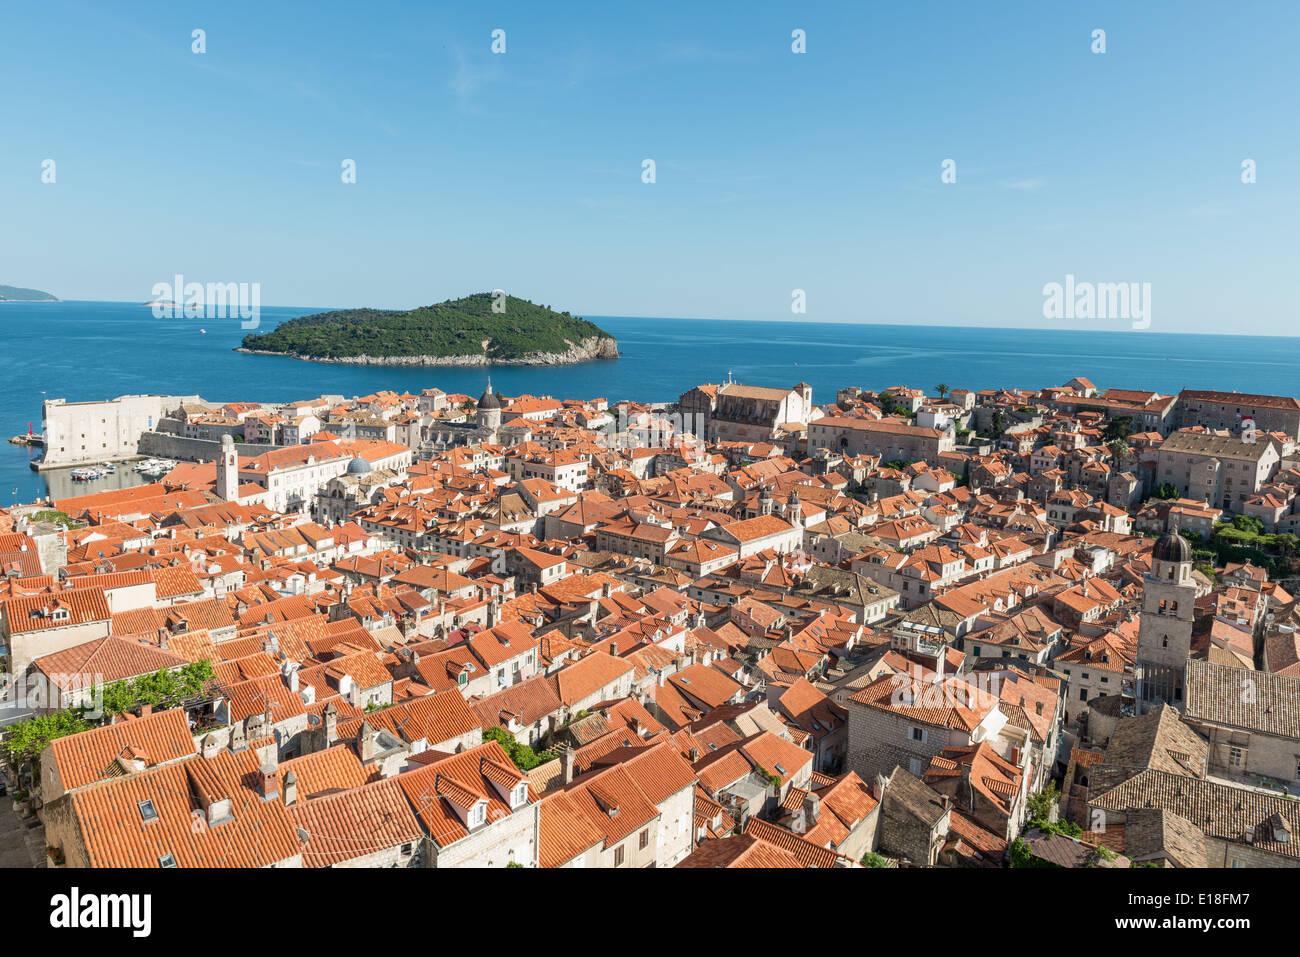 Red rooftops of the old town of Dubrovnik with the sea in the background - Dubrovnik, Croatia Stock Photo